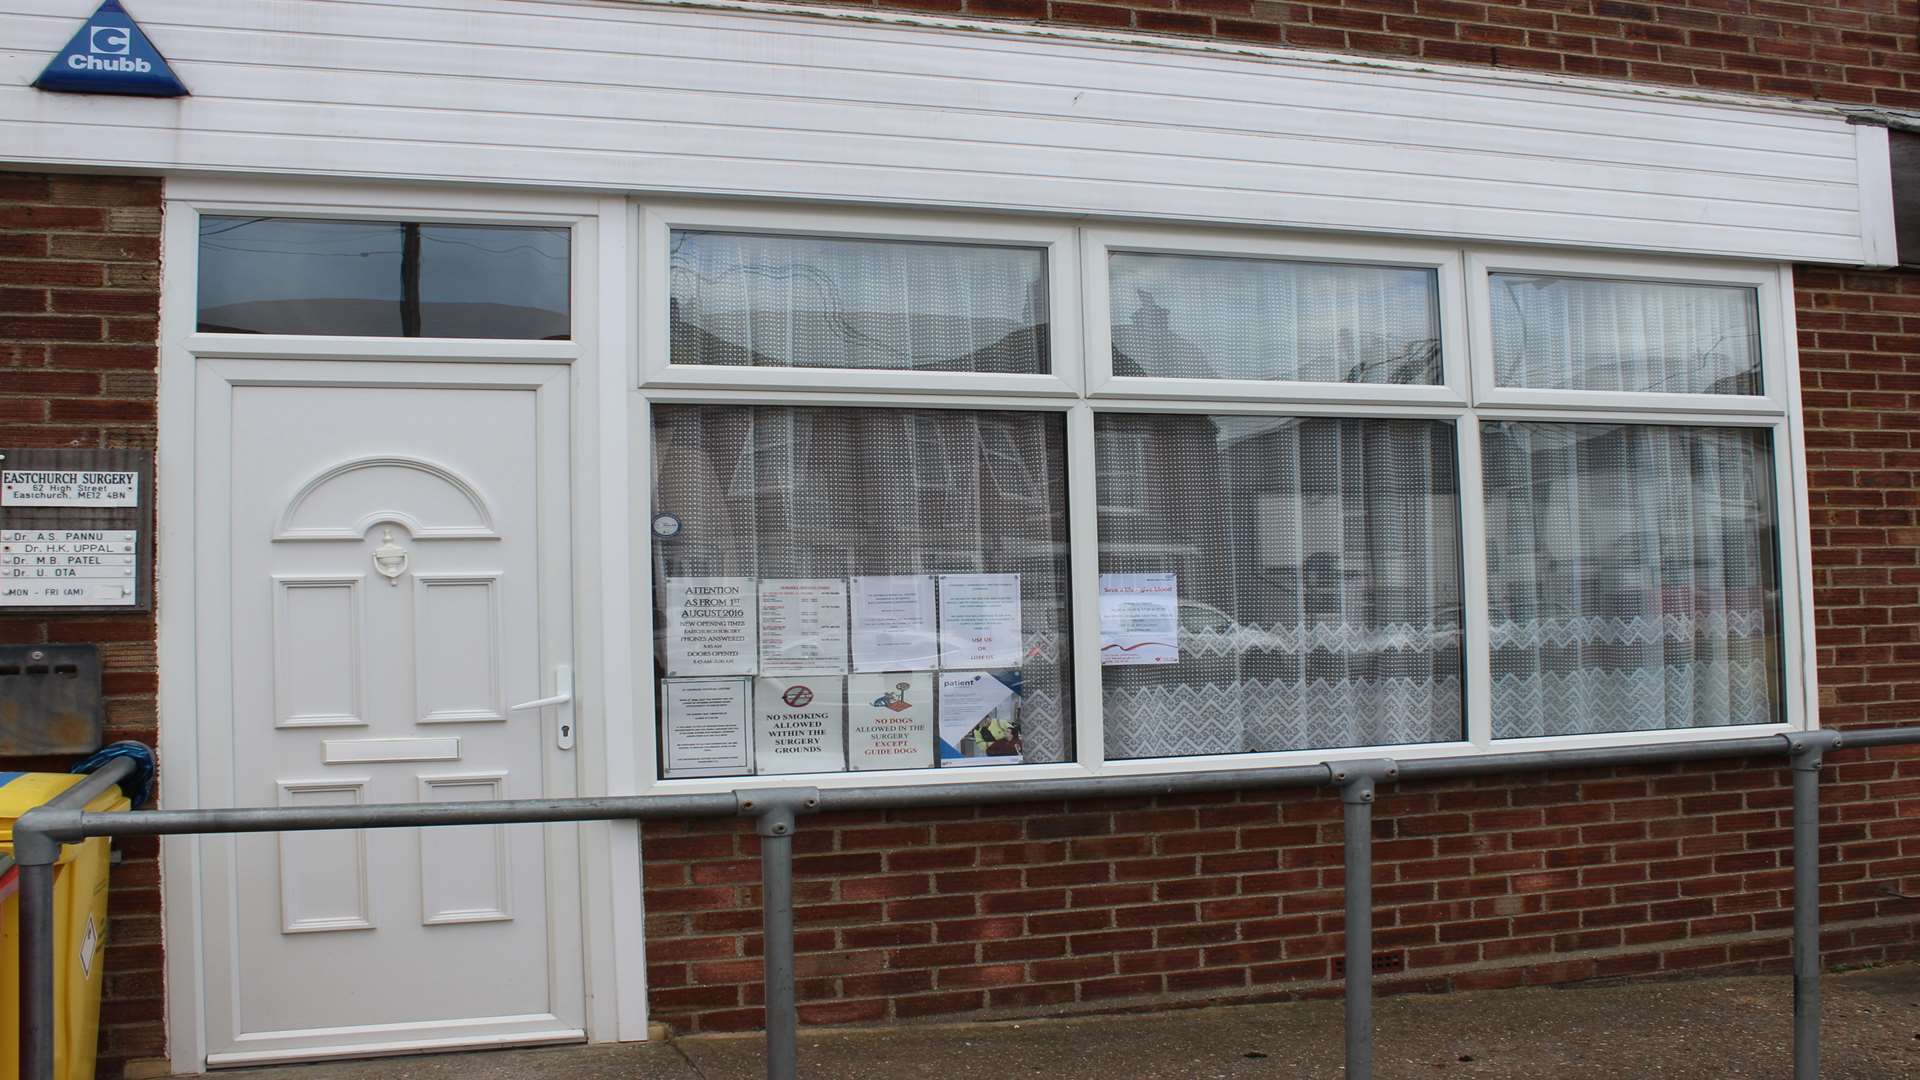 Eastchurch GP Surgery - poster in the window